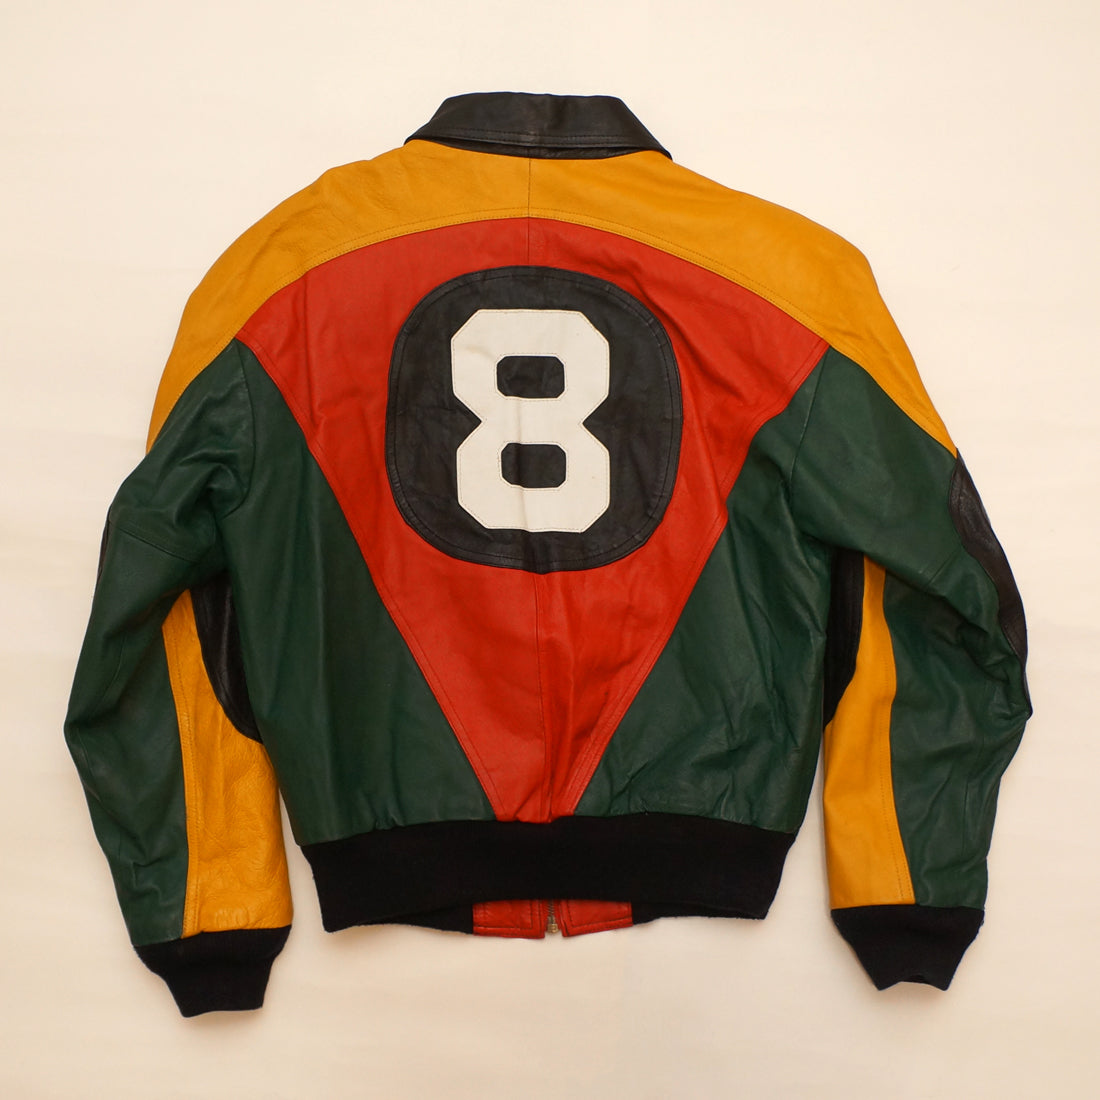 Vintage Leather "8 Ball" Jacket By By Boulder Ridge